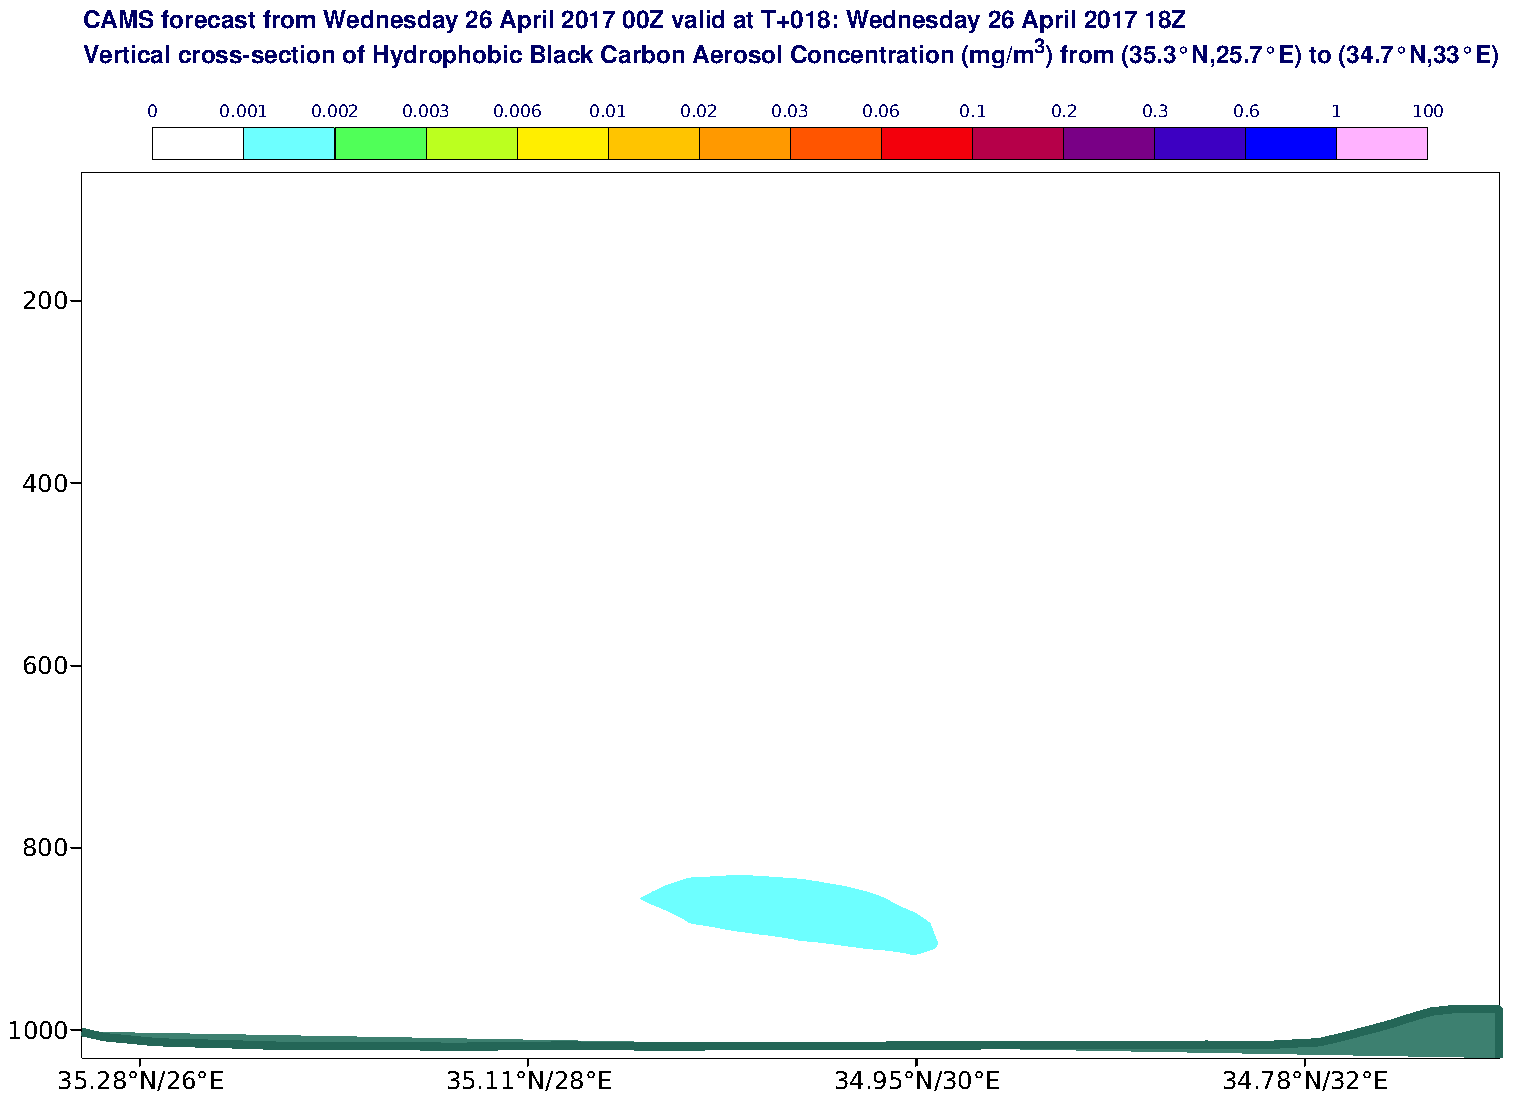 Vertical cross-section of Hydrophobic Black Carbon Aerosol Concentration (mg/m3) valid at T18 - 2017-04-26 18:00